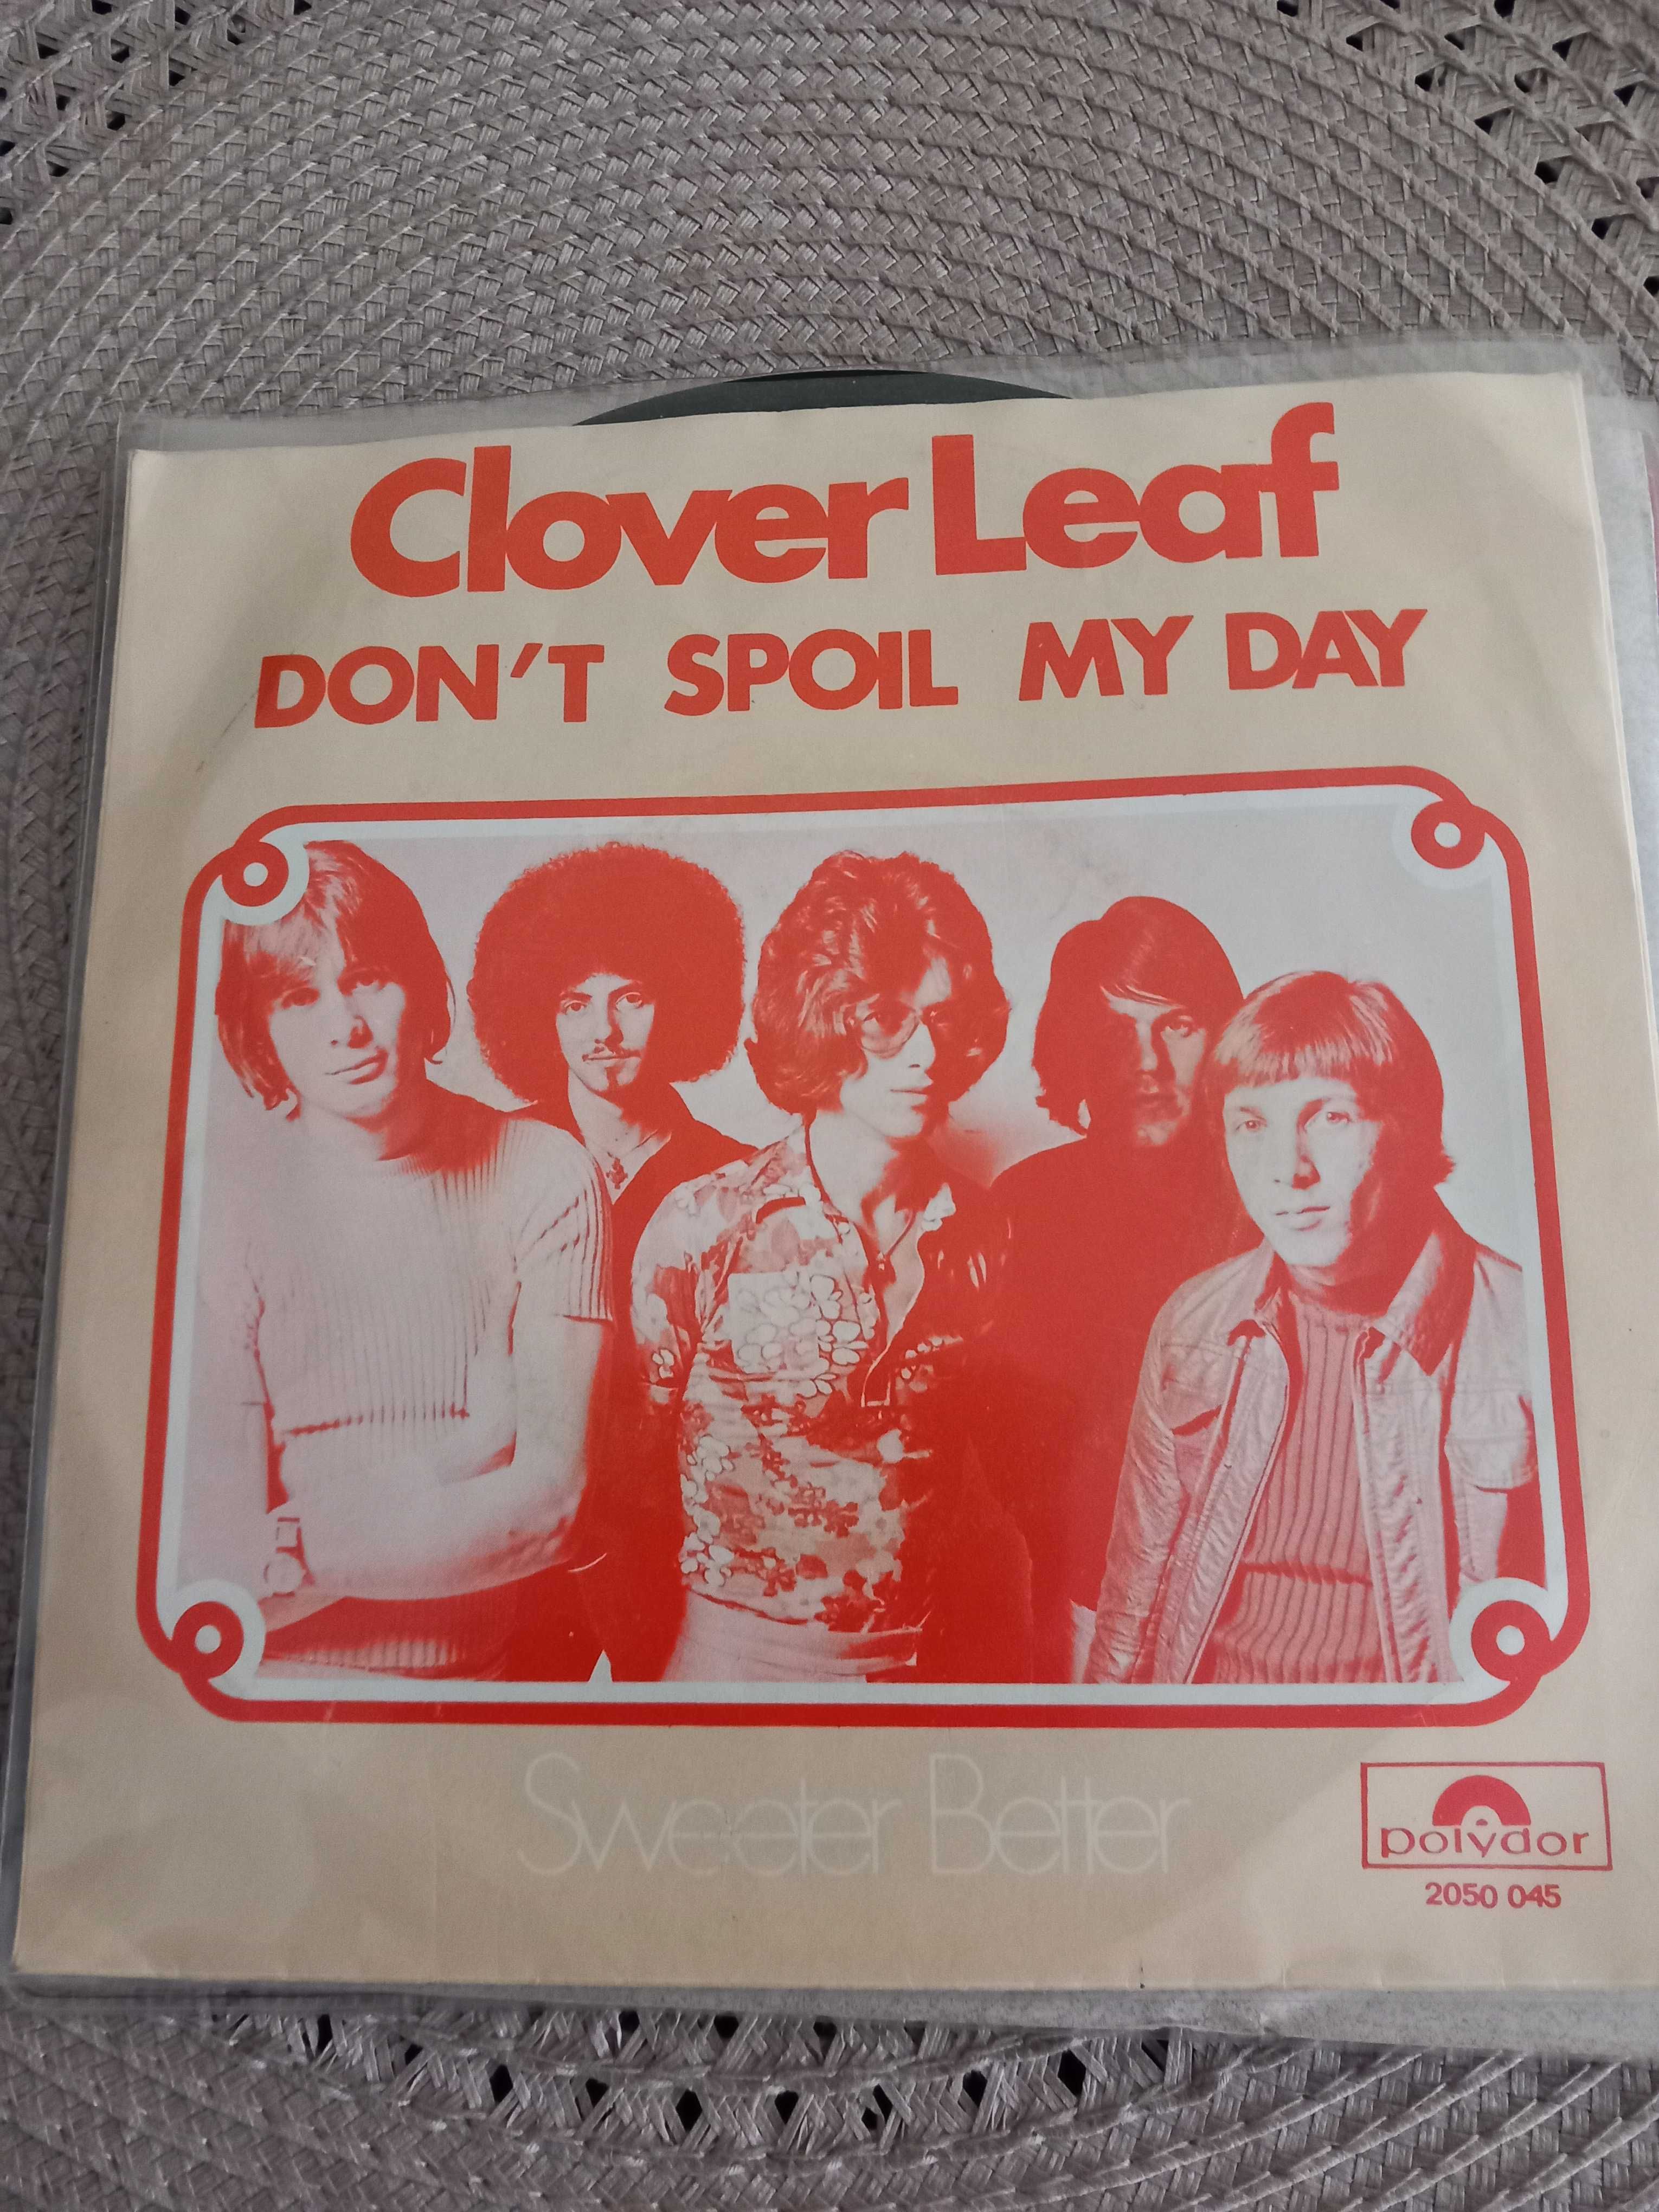 Clover Leaf - dont spoil my day / sweeter better - singiel